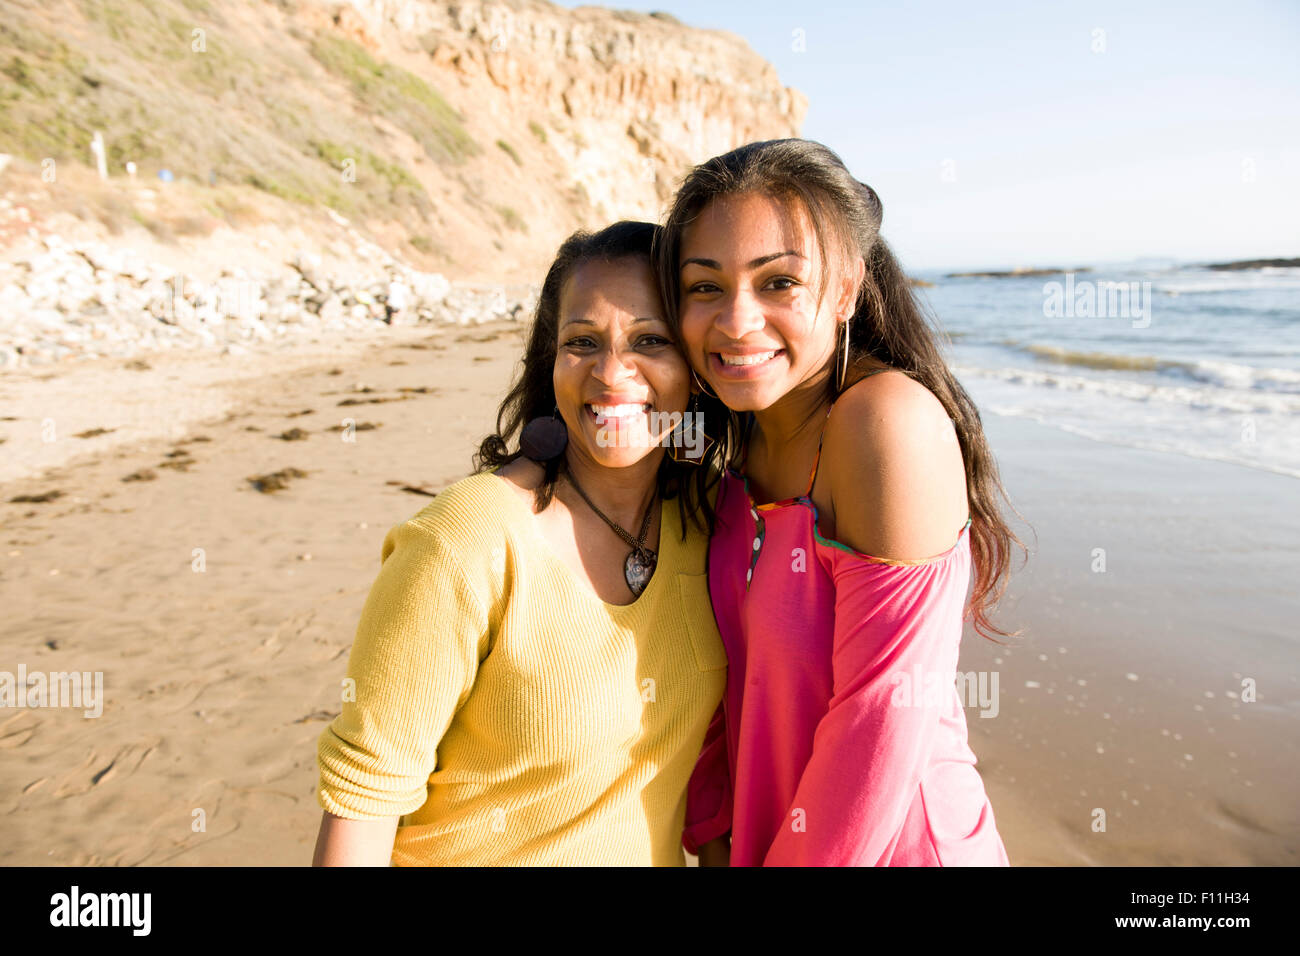 African American mother and daughter smiling on beach Banque D'Images